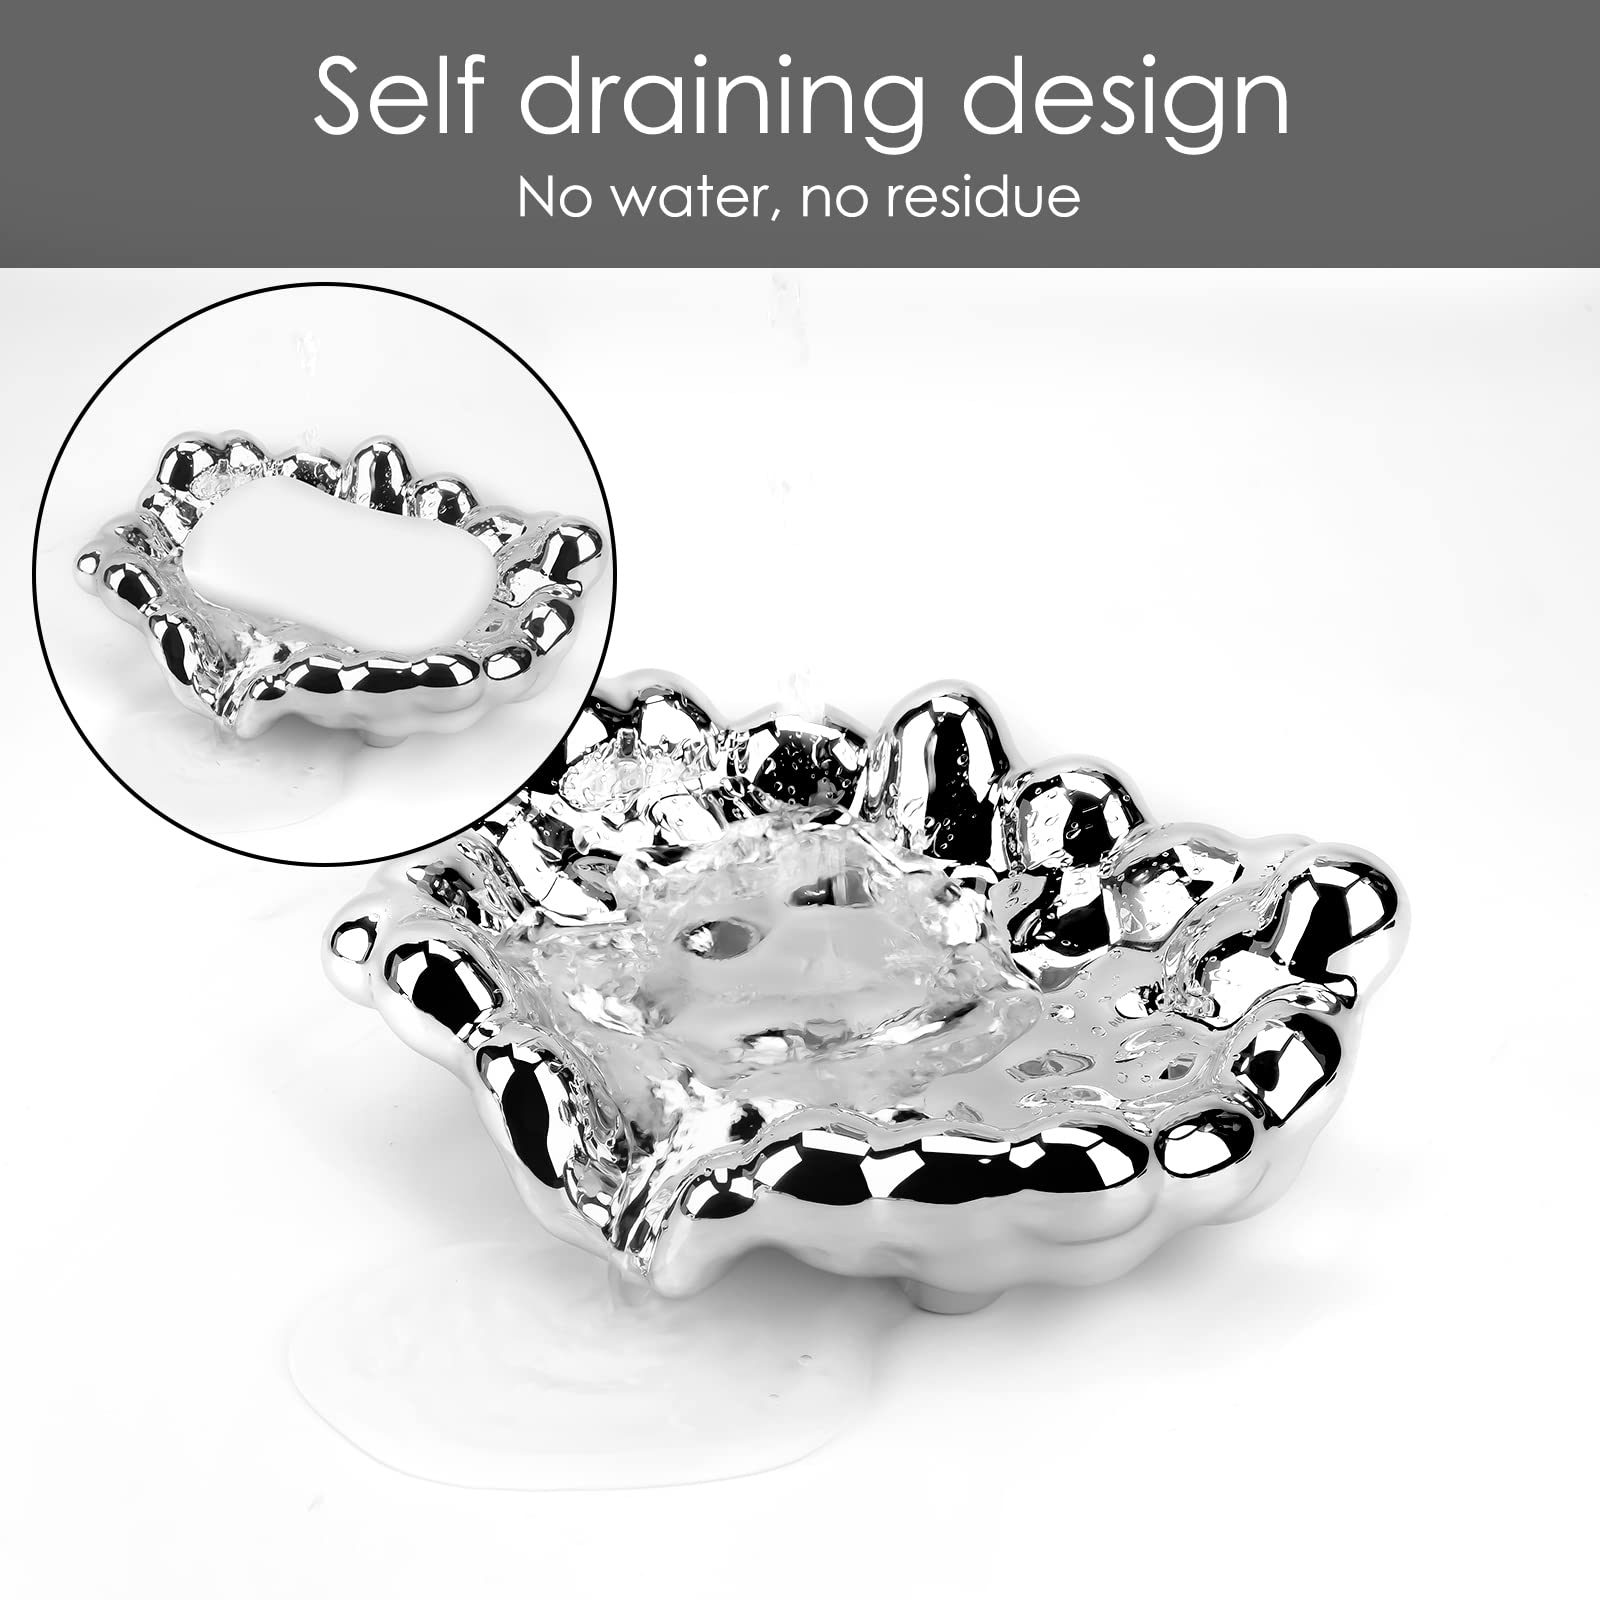 DODAMOUR Soap Dish with Drain, Self Draining Bar Soap Holder, Waterfall Soap Tray Saver Container for Bathroom (Silver)